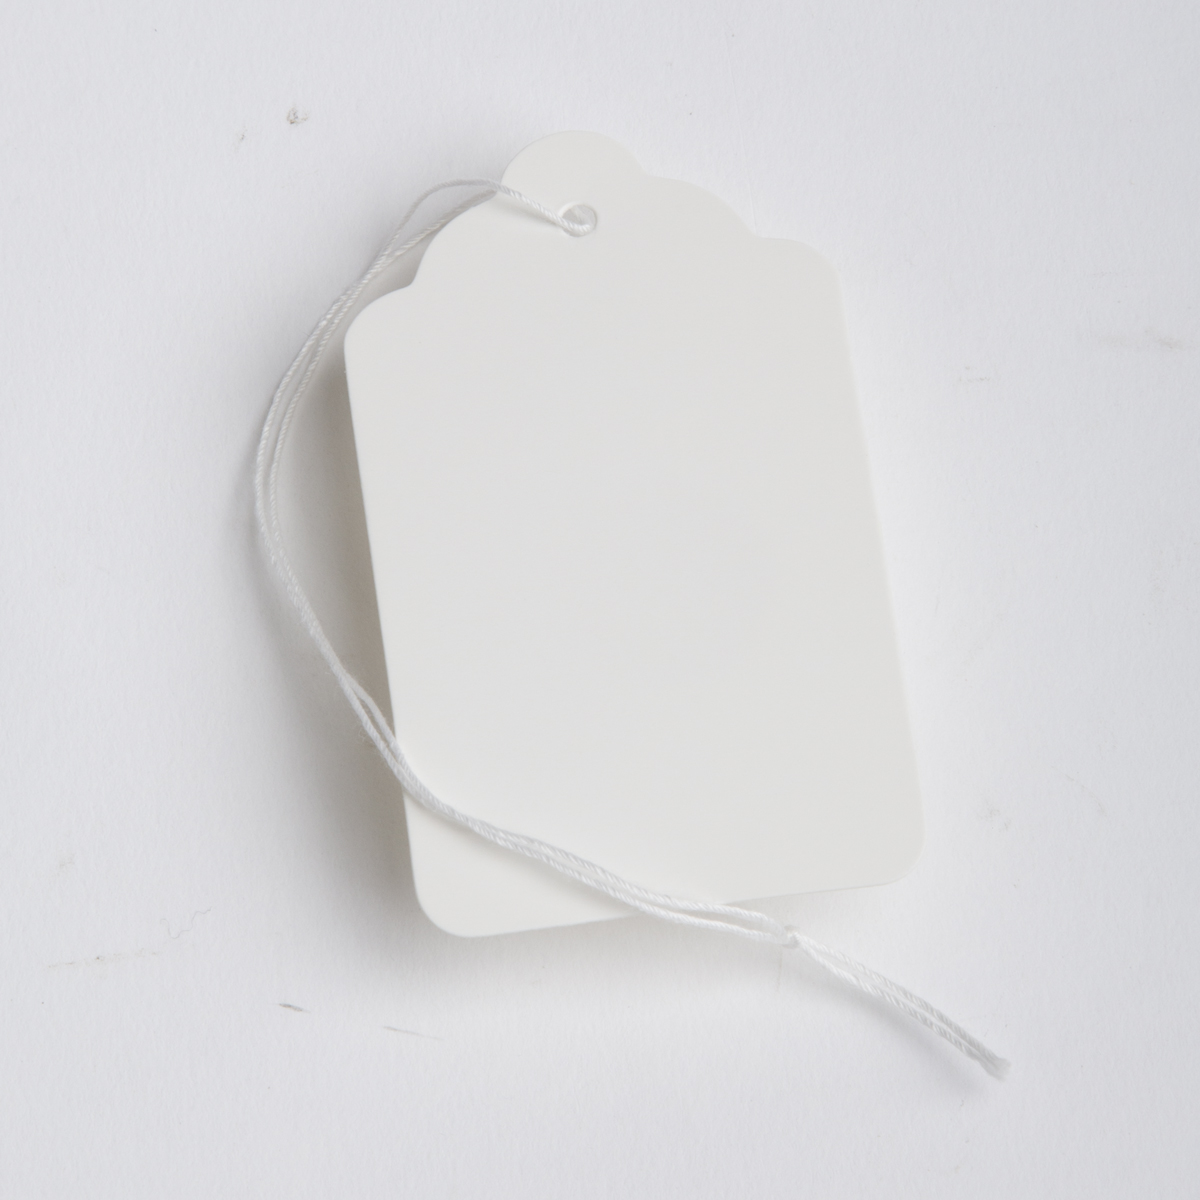 White Jewelry Price Tag for Jewelry String Price Tag w/string Hanging Tag 1000Pc 